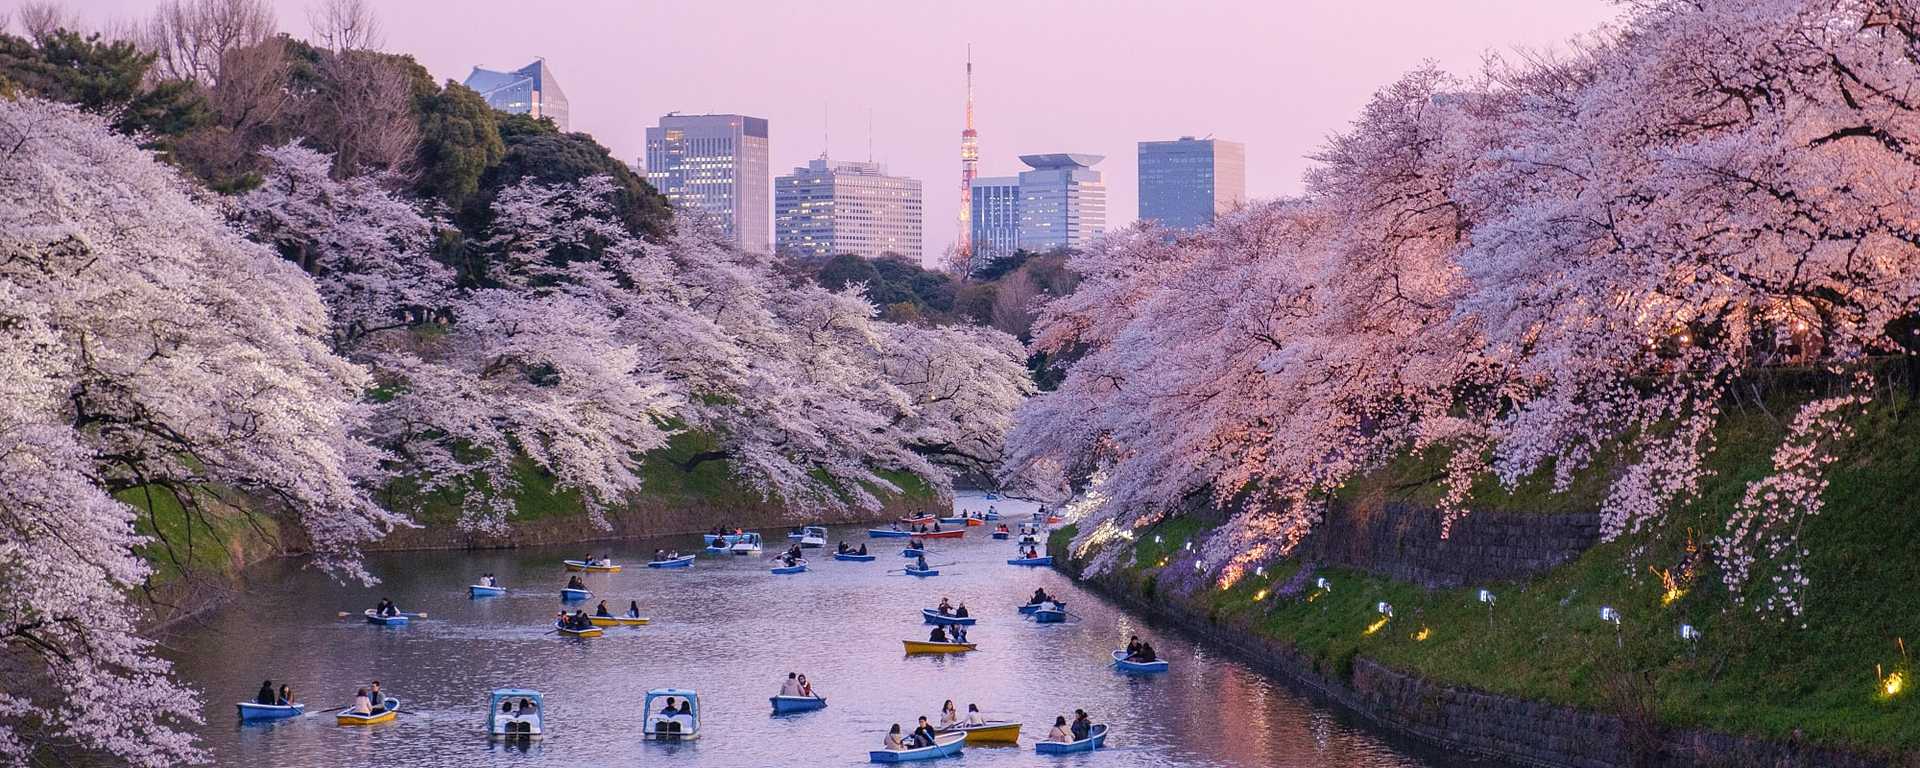 Couples boating on a cherry blossom lined river in Chiyoda, Japan